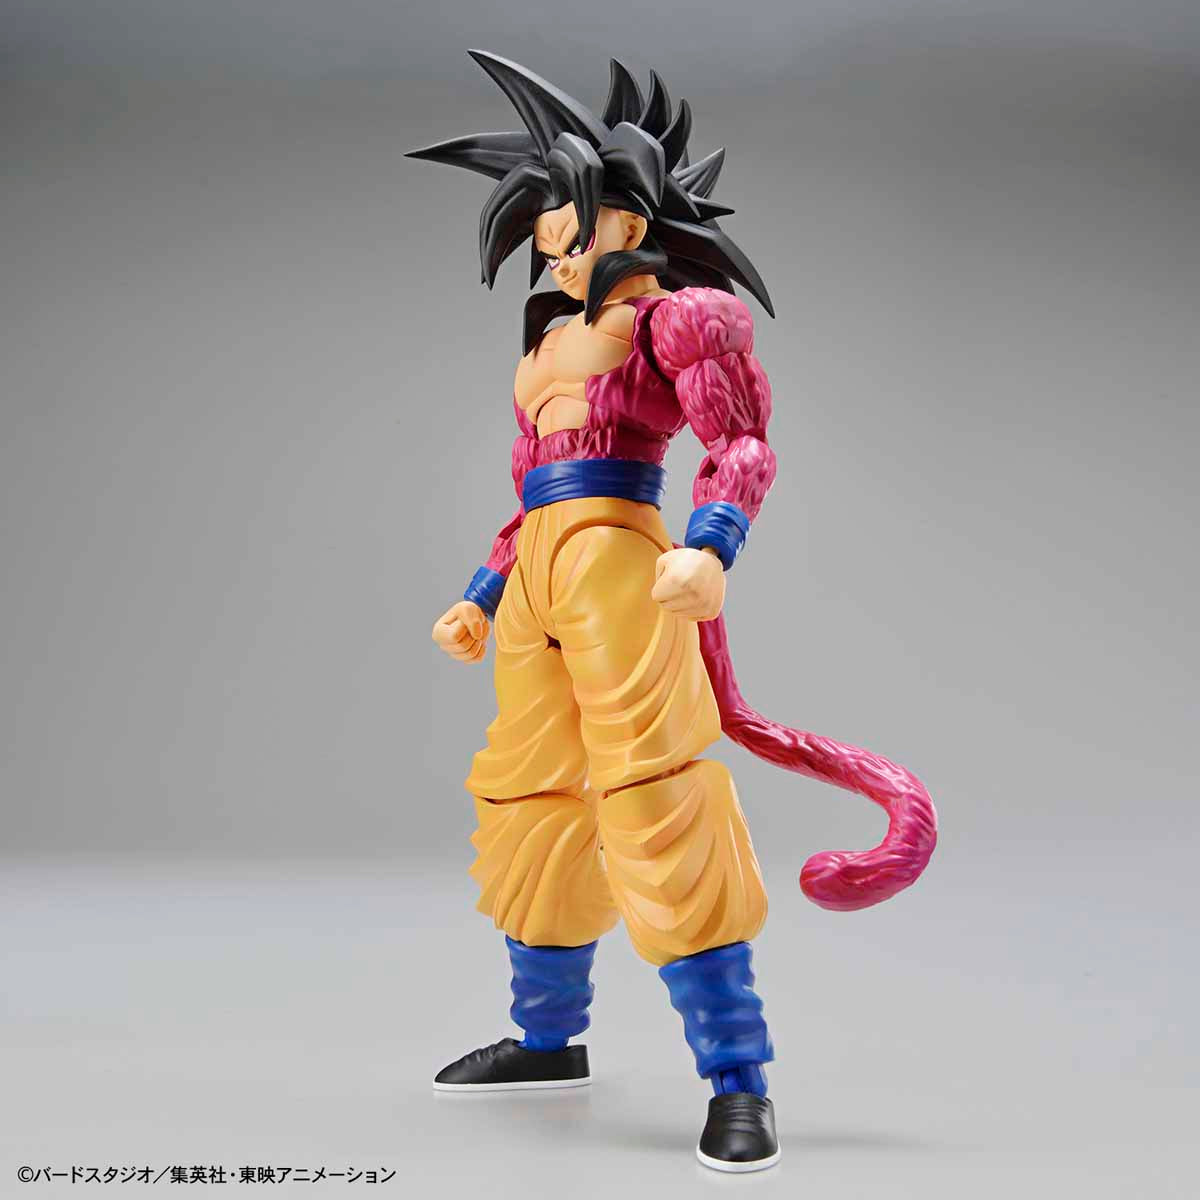 Dragon Ball - Super Saiyan 4 Son Goku - Figure-rise Standard Model Kit (Bandai), Includes Kamehameha effect parts, interchangeable angry expression parts, and more, Nippon Figures